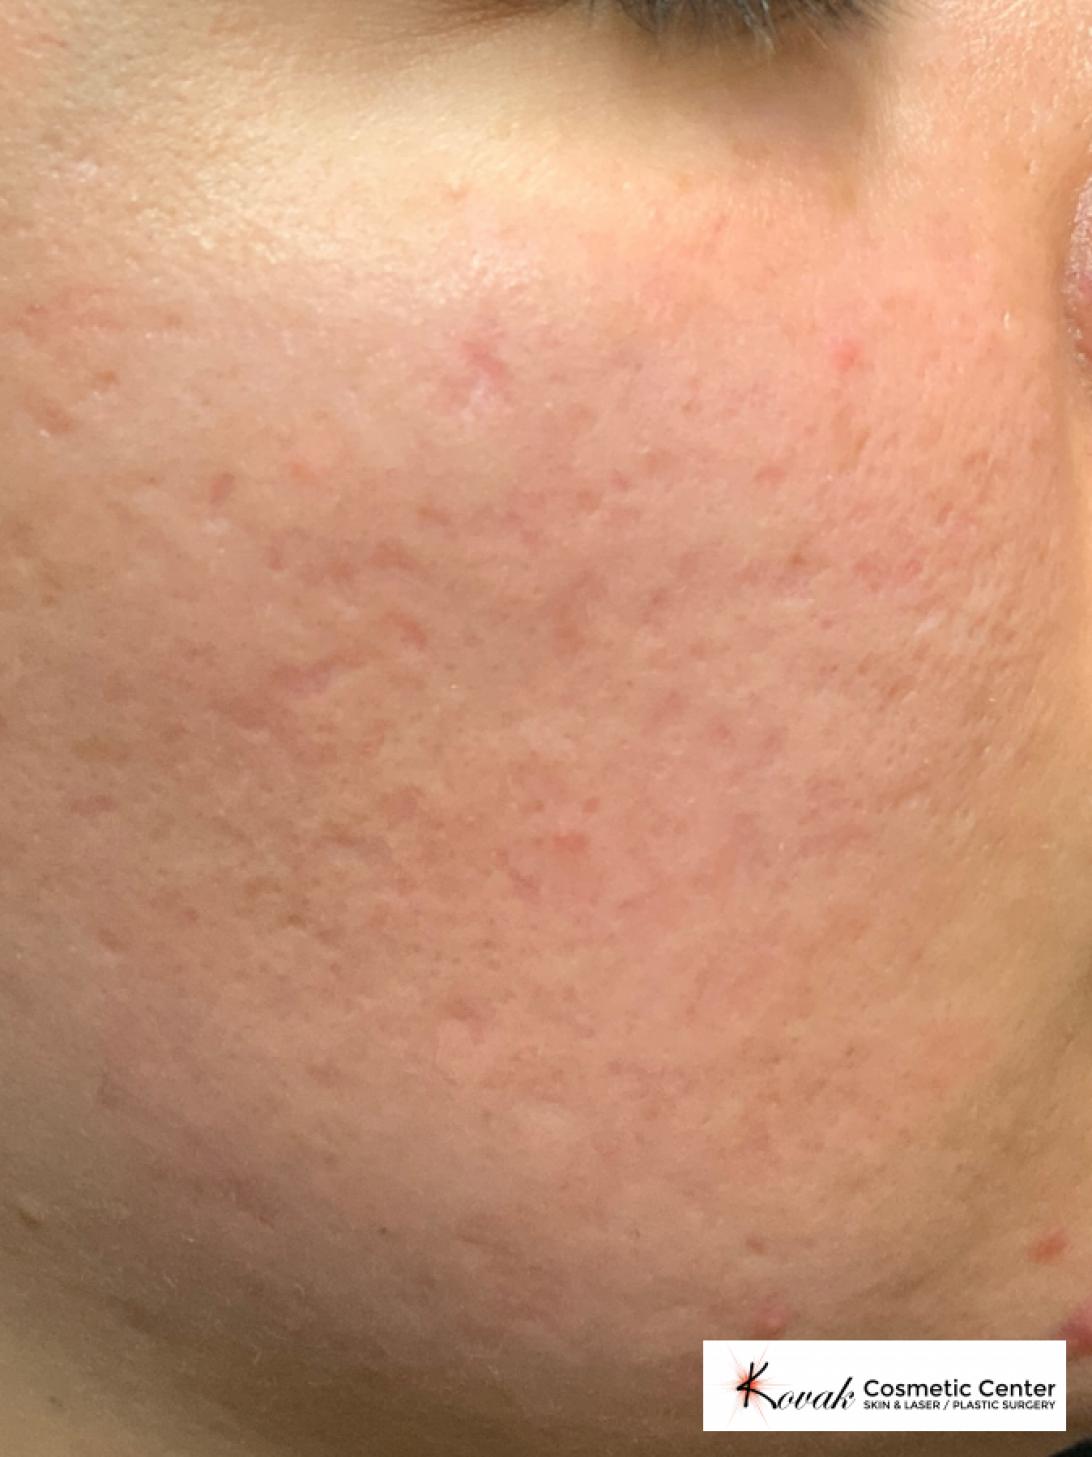 Acne Scars treated with Venus Viva on 30 year old female - After  